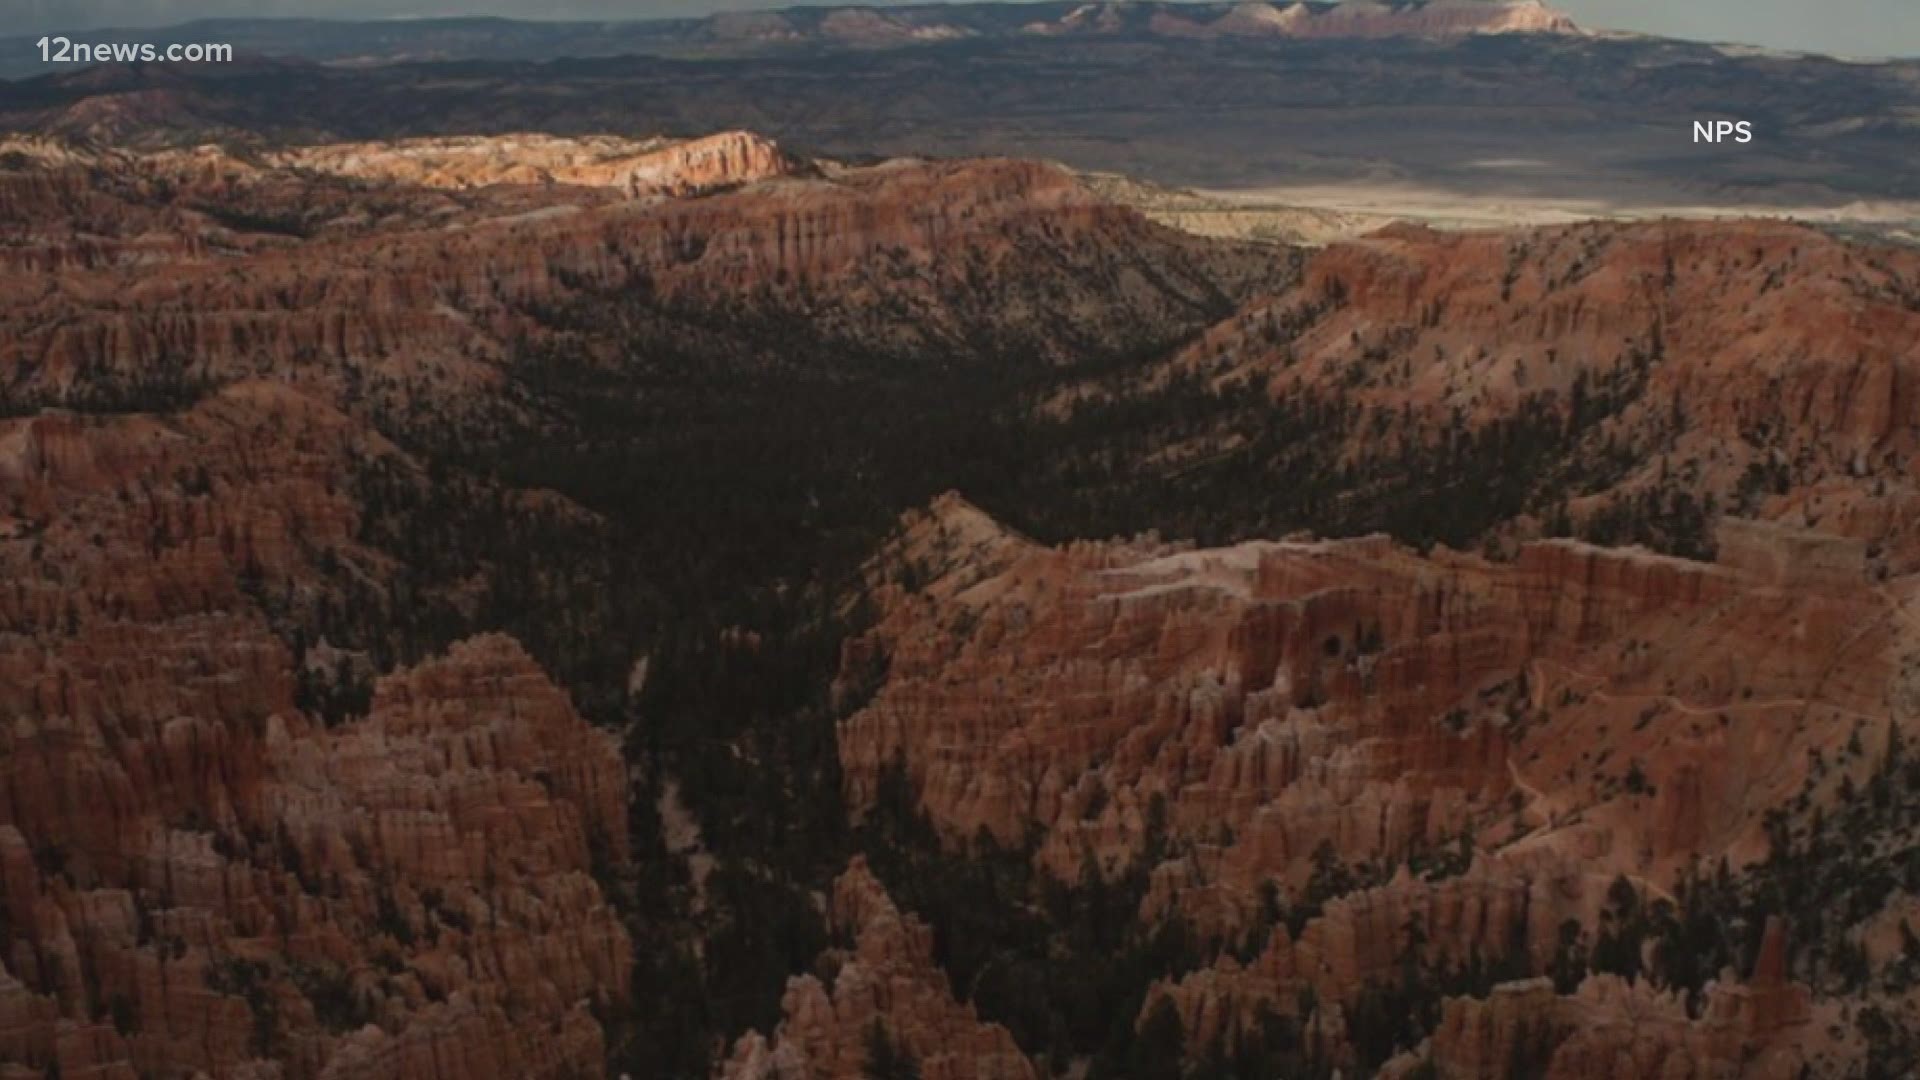 Mark Langenbach was on a solo trip to Bryce Canyon National Park in Utah when he got lost and spent three days and two nights lost in the canyon.